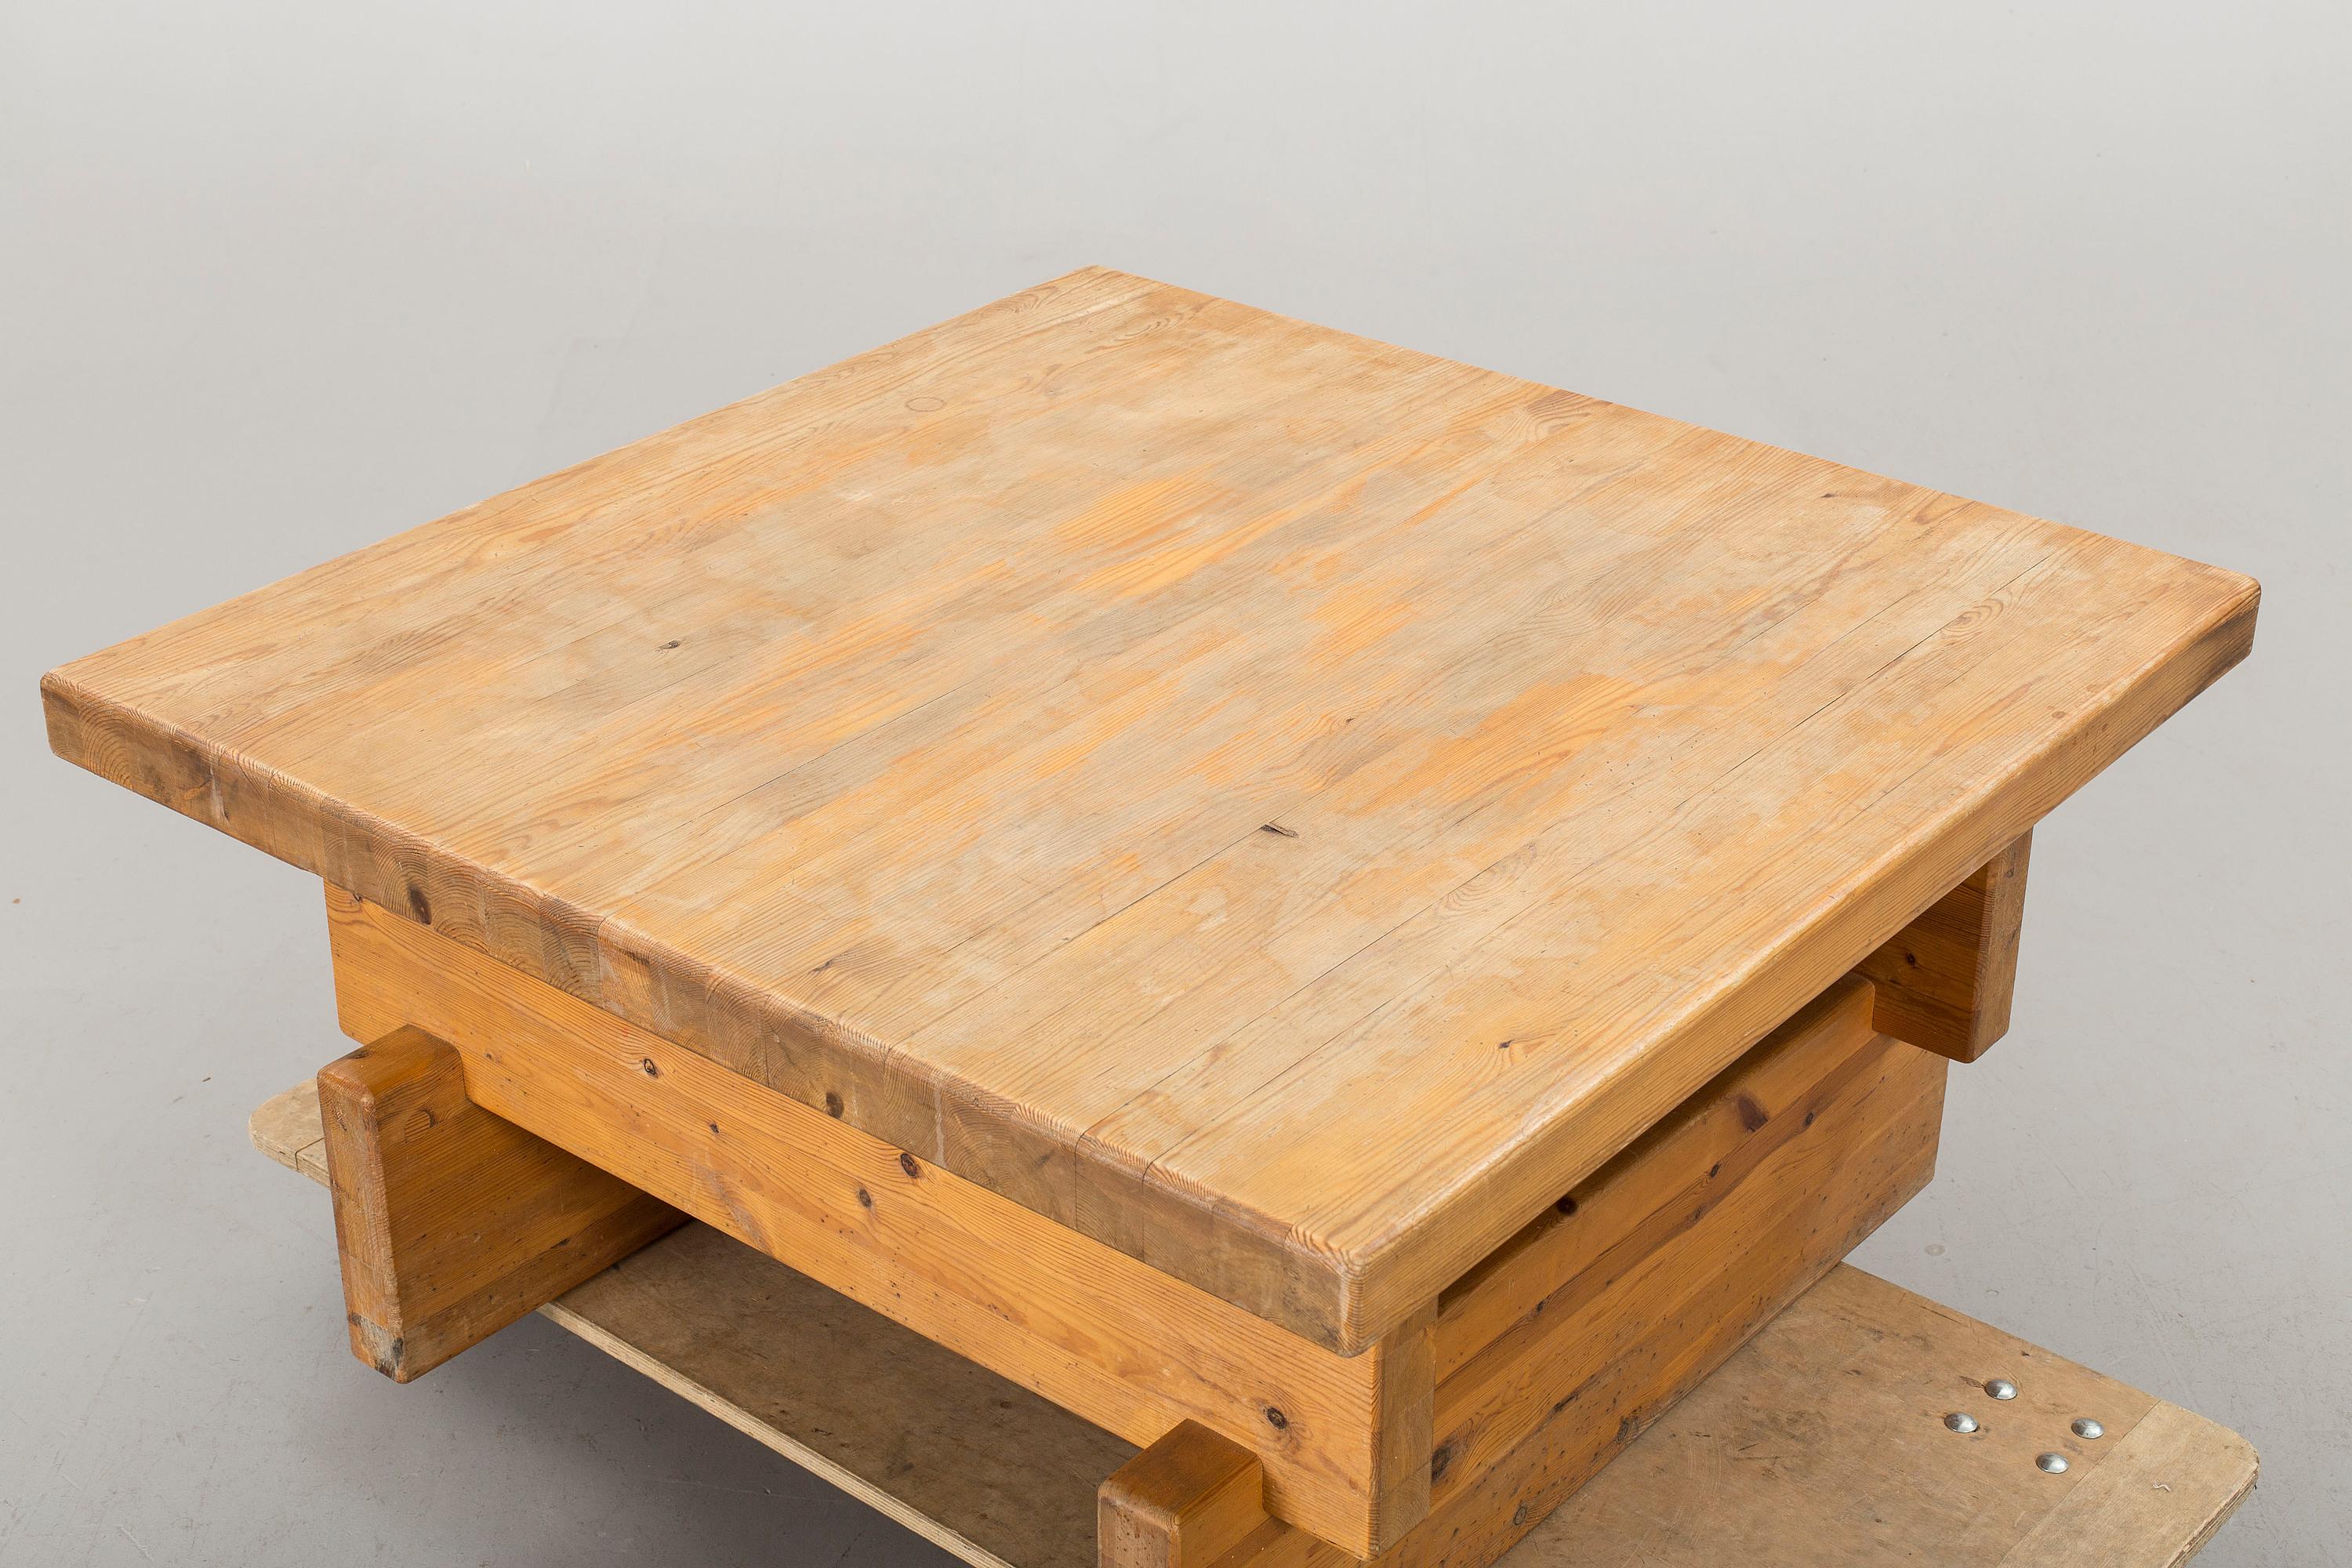 Roland Wilhelmsson, modernist coffee table, solid pine, Sweden, 1960s.

A modernist / Minimalist studio coffee table. 
Designed by Roland Wilhelmsson. 
Probably produced by Karl Andersson & Söner. 

Measures: H 17.92 in. x W 39.38 in. x D